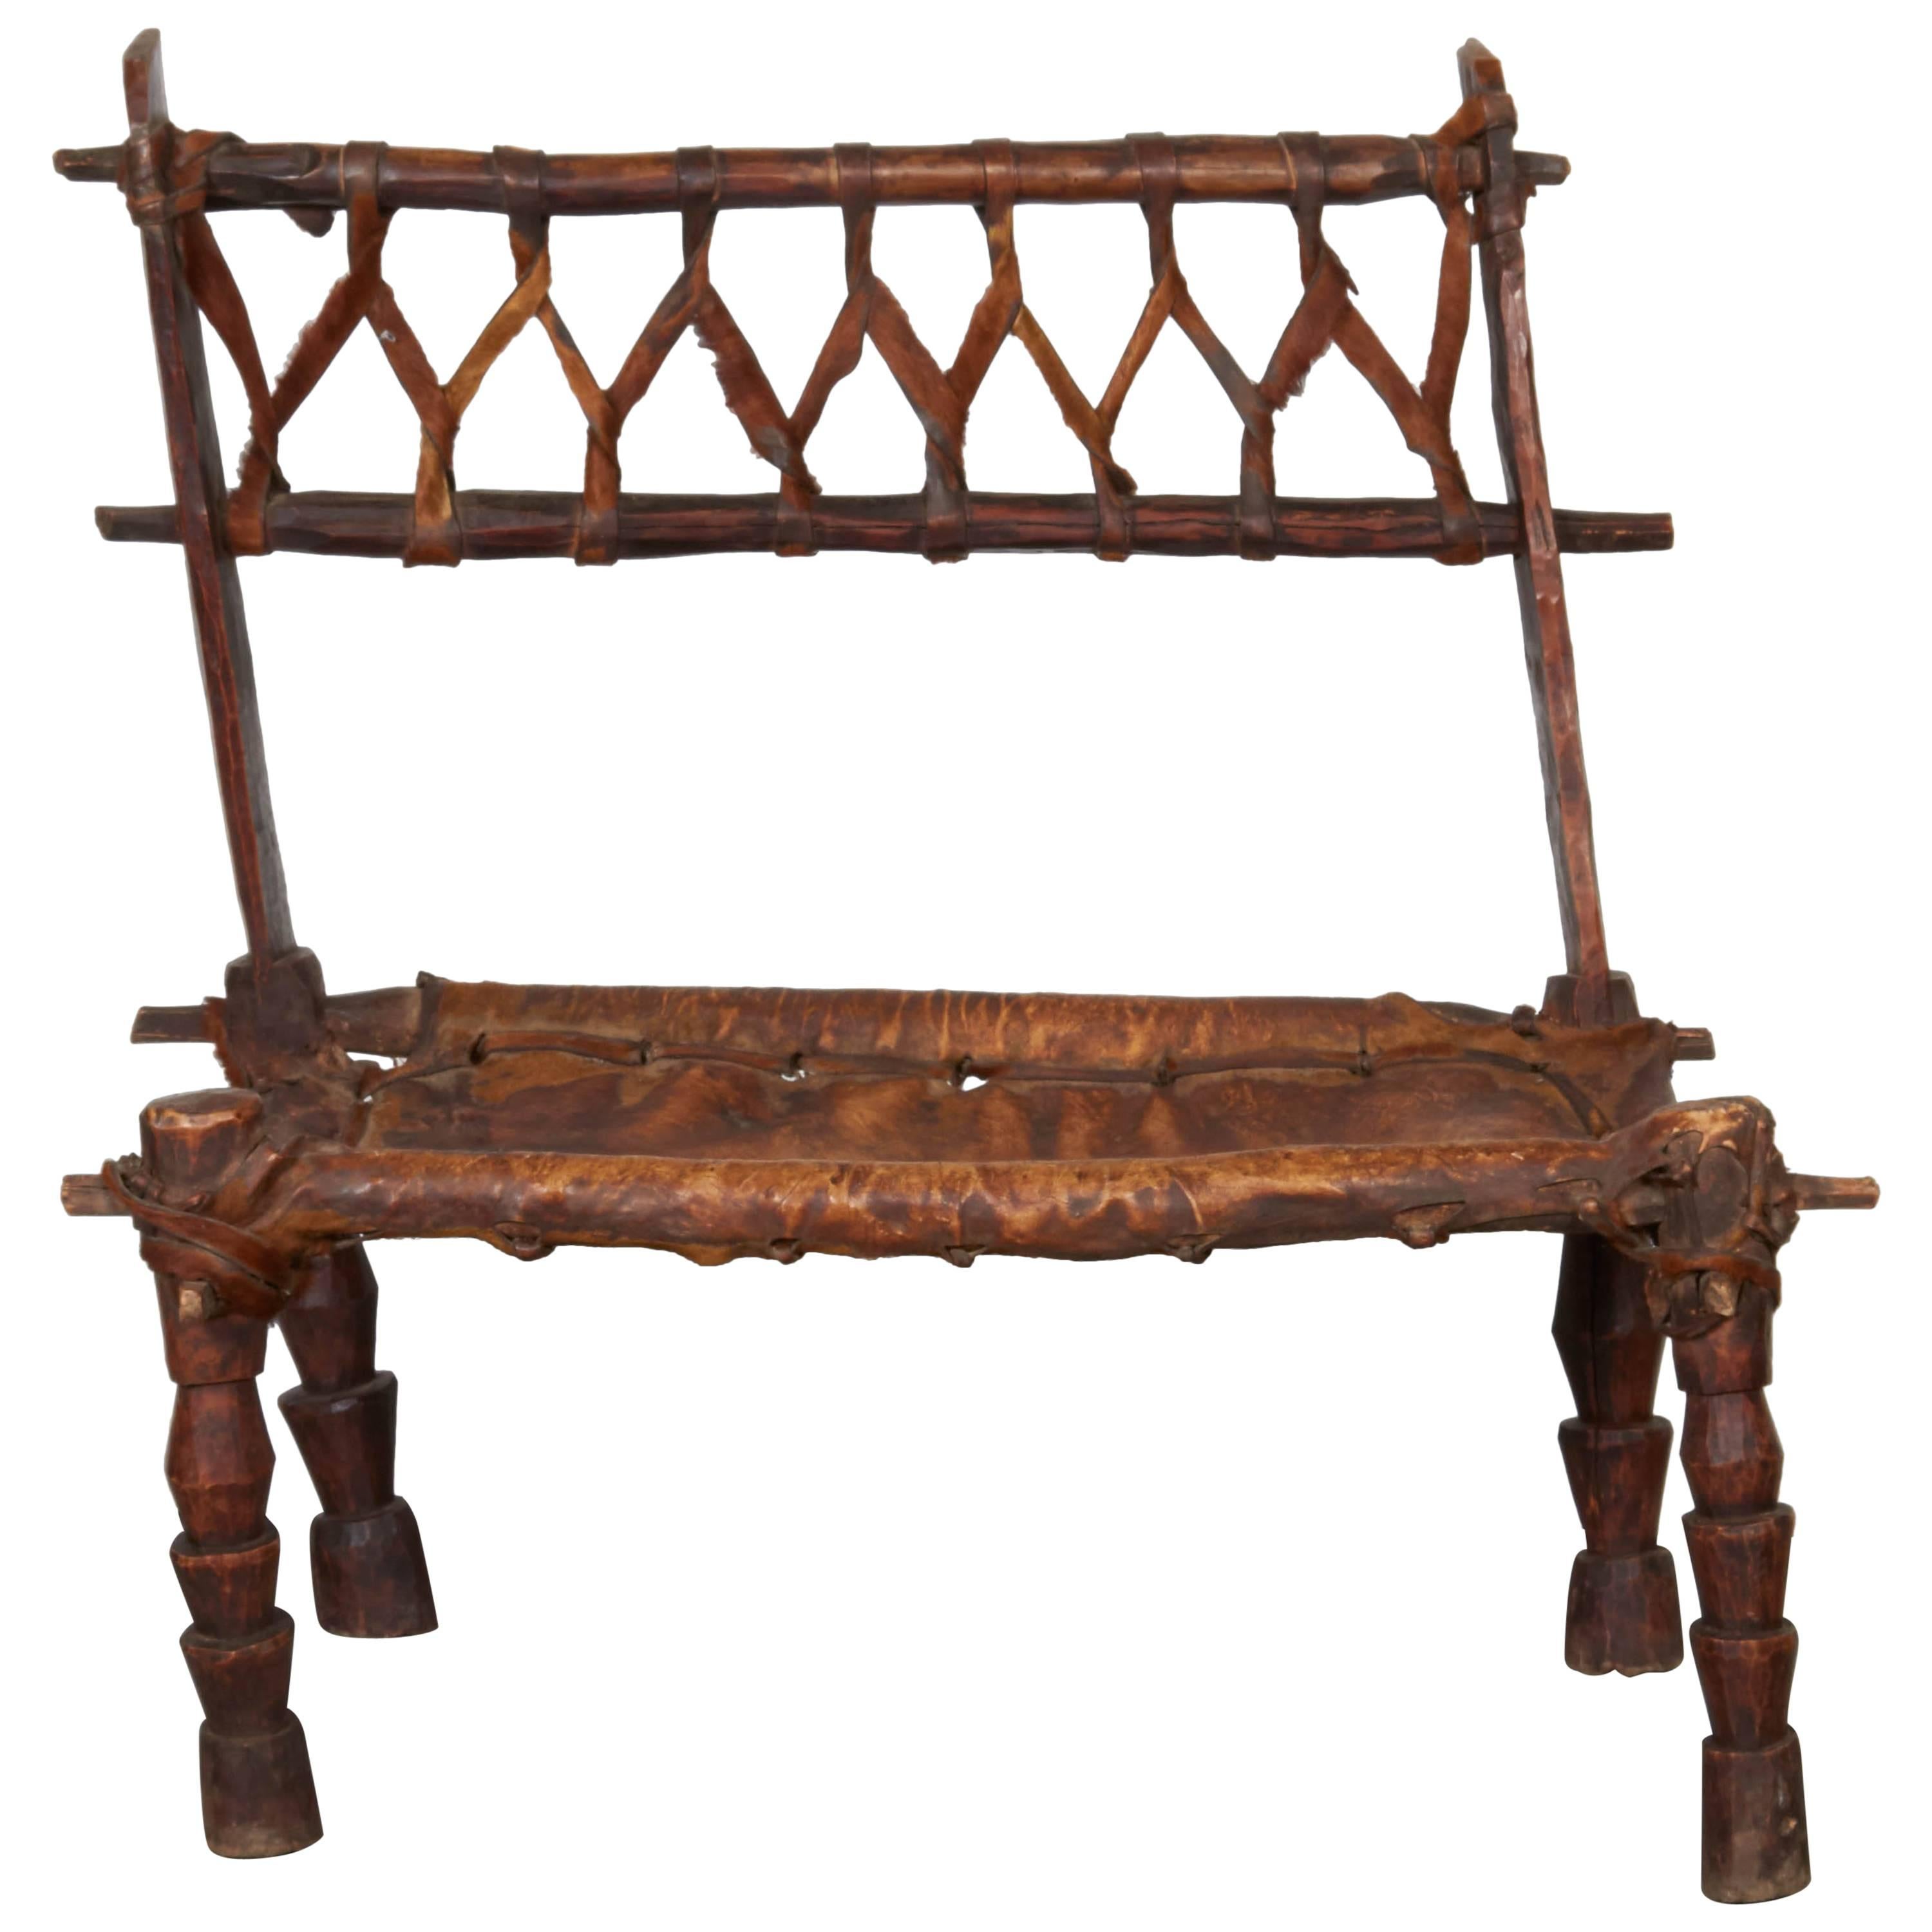 Rustic Antique Wood and Leather Bench with Great Patina and Character